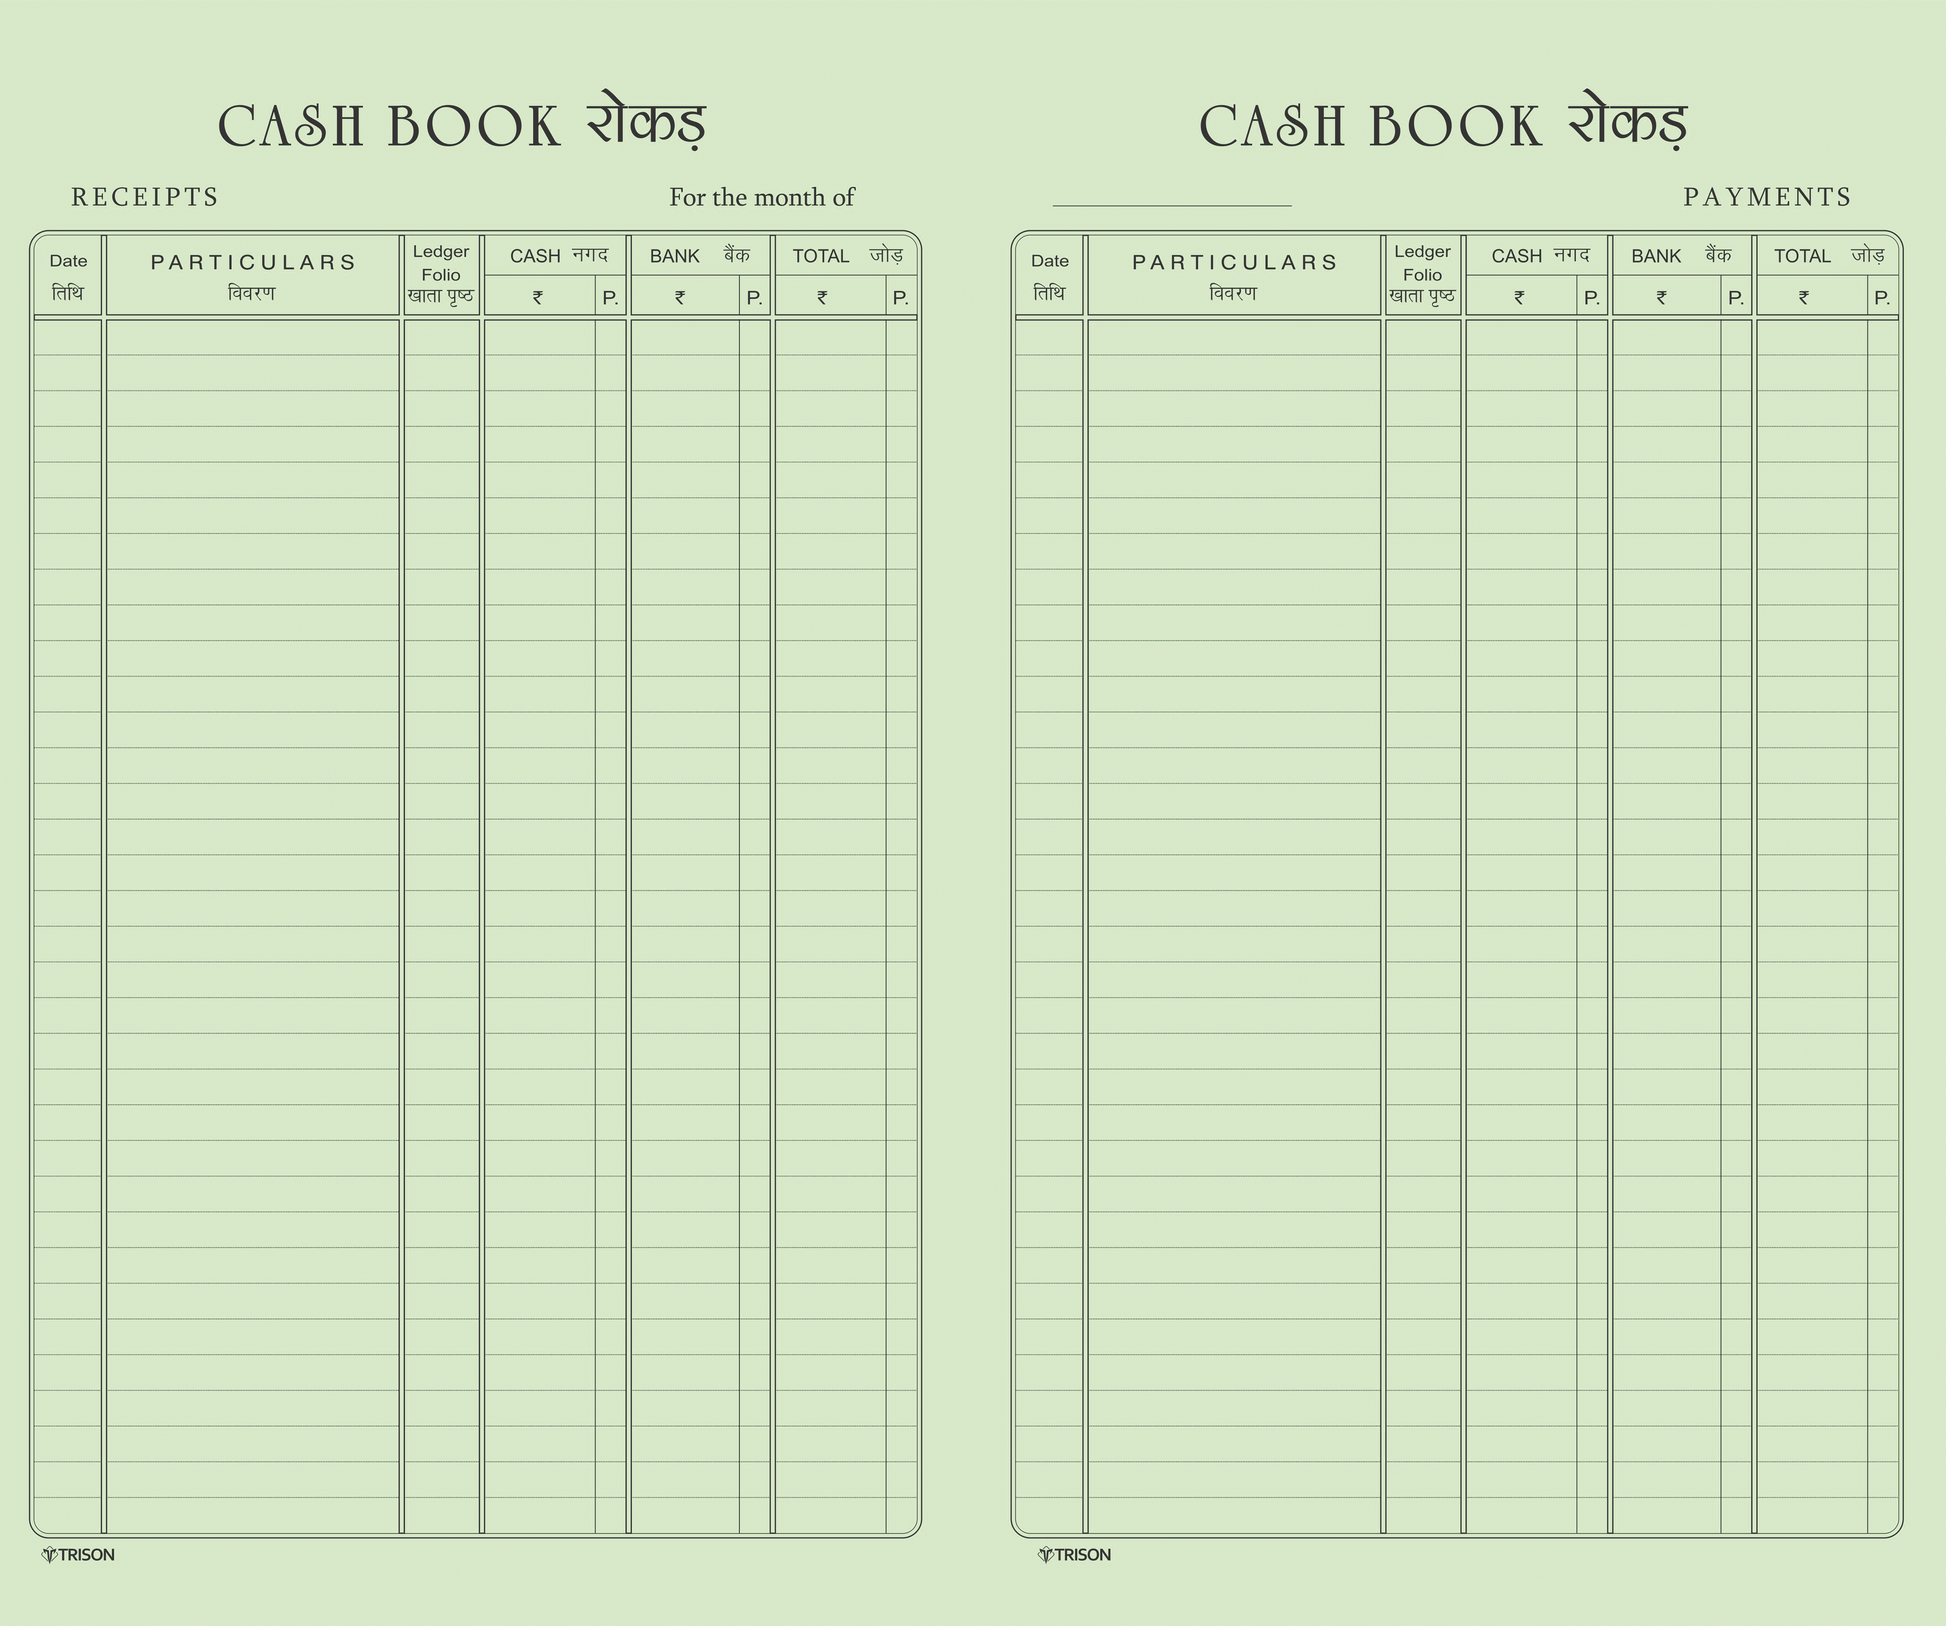 Trison Cash Book (premium quality) | Available in Red Binding (R/B), White Binding (L/B) & Ordinary Binding (O/B) | 70 65 GSM | Green ledger paper | Size: 21.5x34 cm & 19.5 x 32.5 cm | Superior cloth hardbound | Gloss laminated printed cover | PVC rexine cover | Available in No./Pages: 1/64,  2/128, 3/192, 4/256, 5/360, 6/432, 8/576, 10/720 & 12/864 | Comes with Index page | Also known as Kona pusta binding| cashbook | cash copy | cash book | ca | rokkar | rokad | rokda